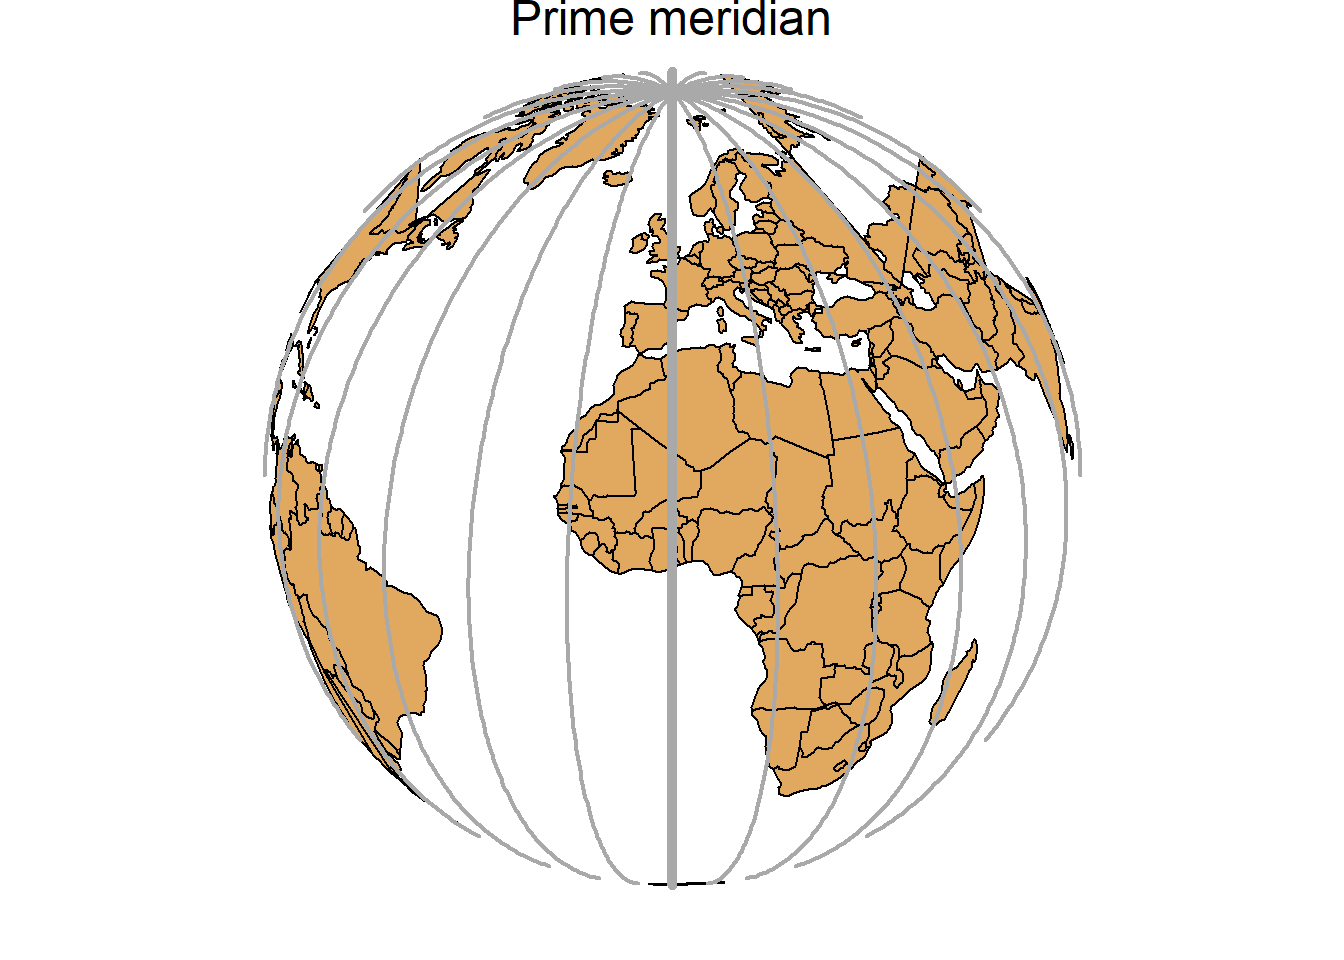 Parallels (left) and meridians (right) of the Earth.